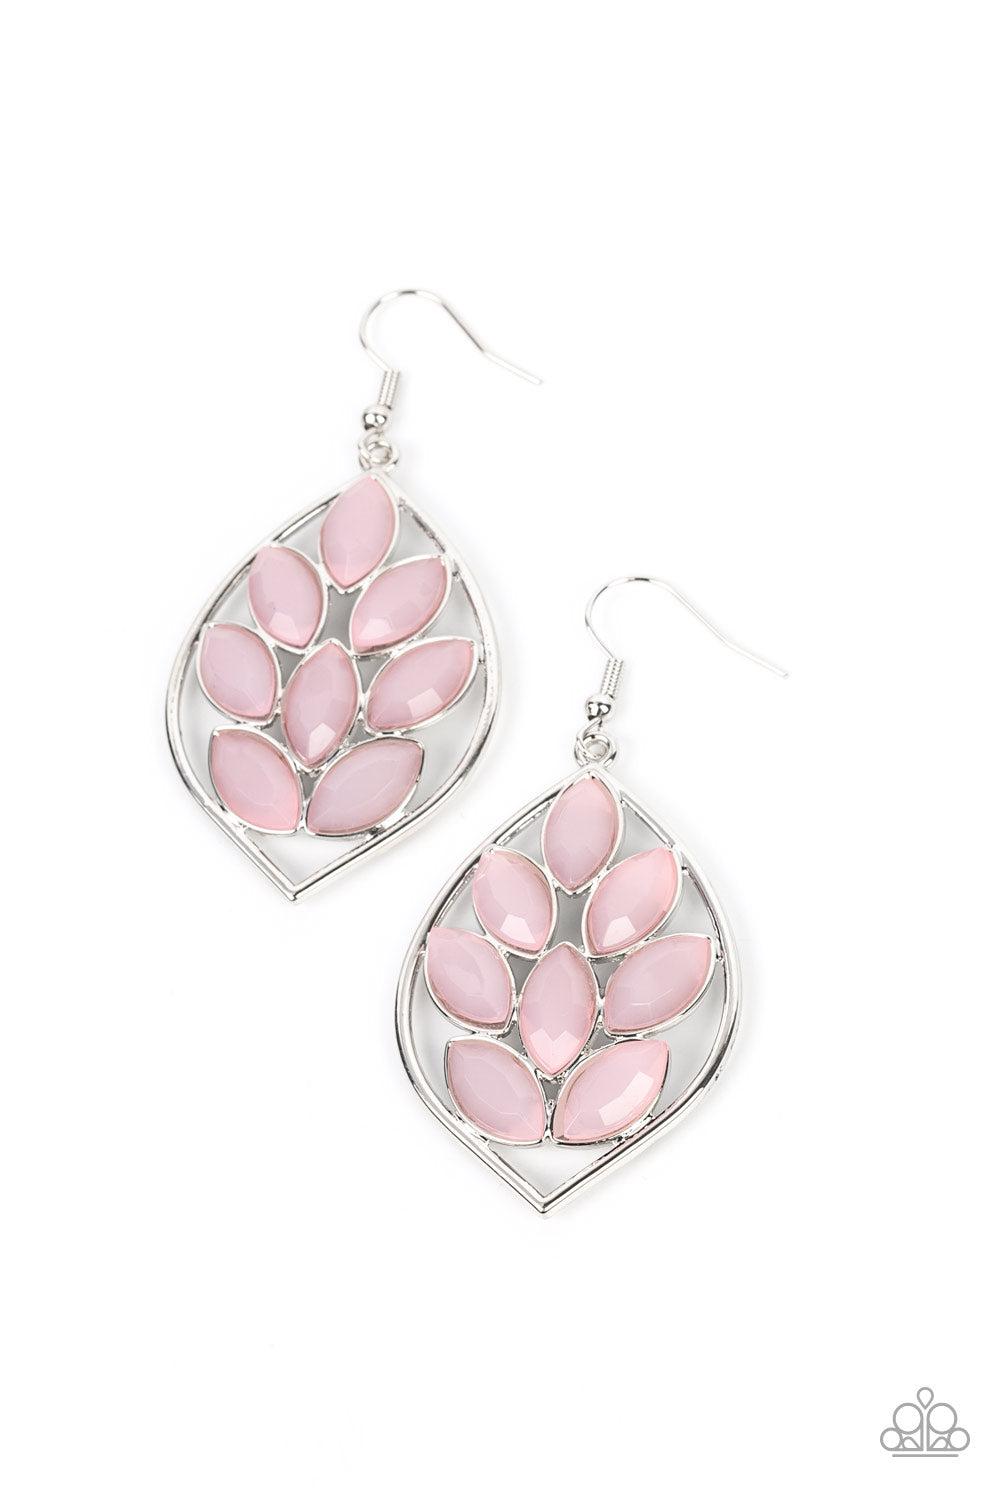 Glacial Glades Pink Cat&#39;s Eye Stone Earrings- lightbox - CarasShop.com - $5 Jewelry by Cara Jewels